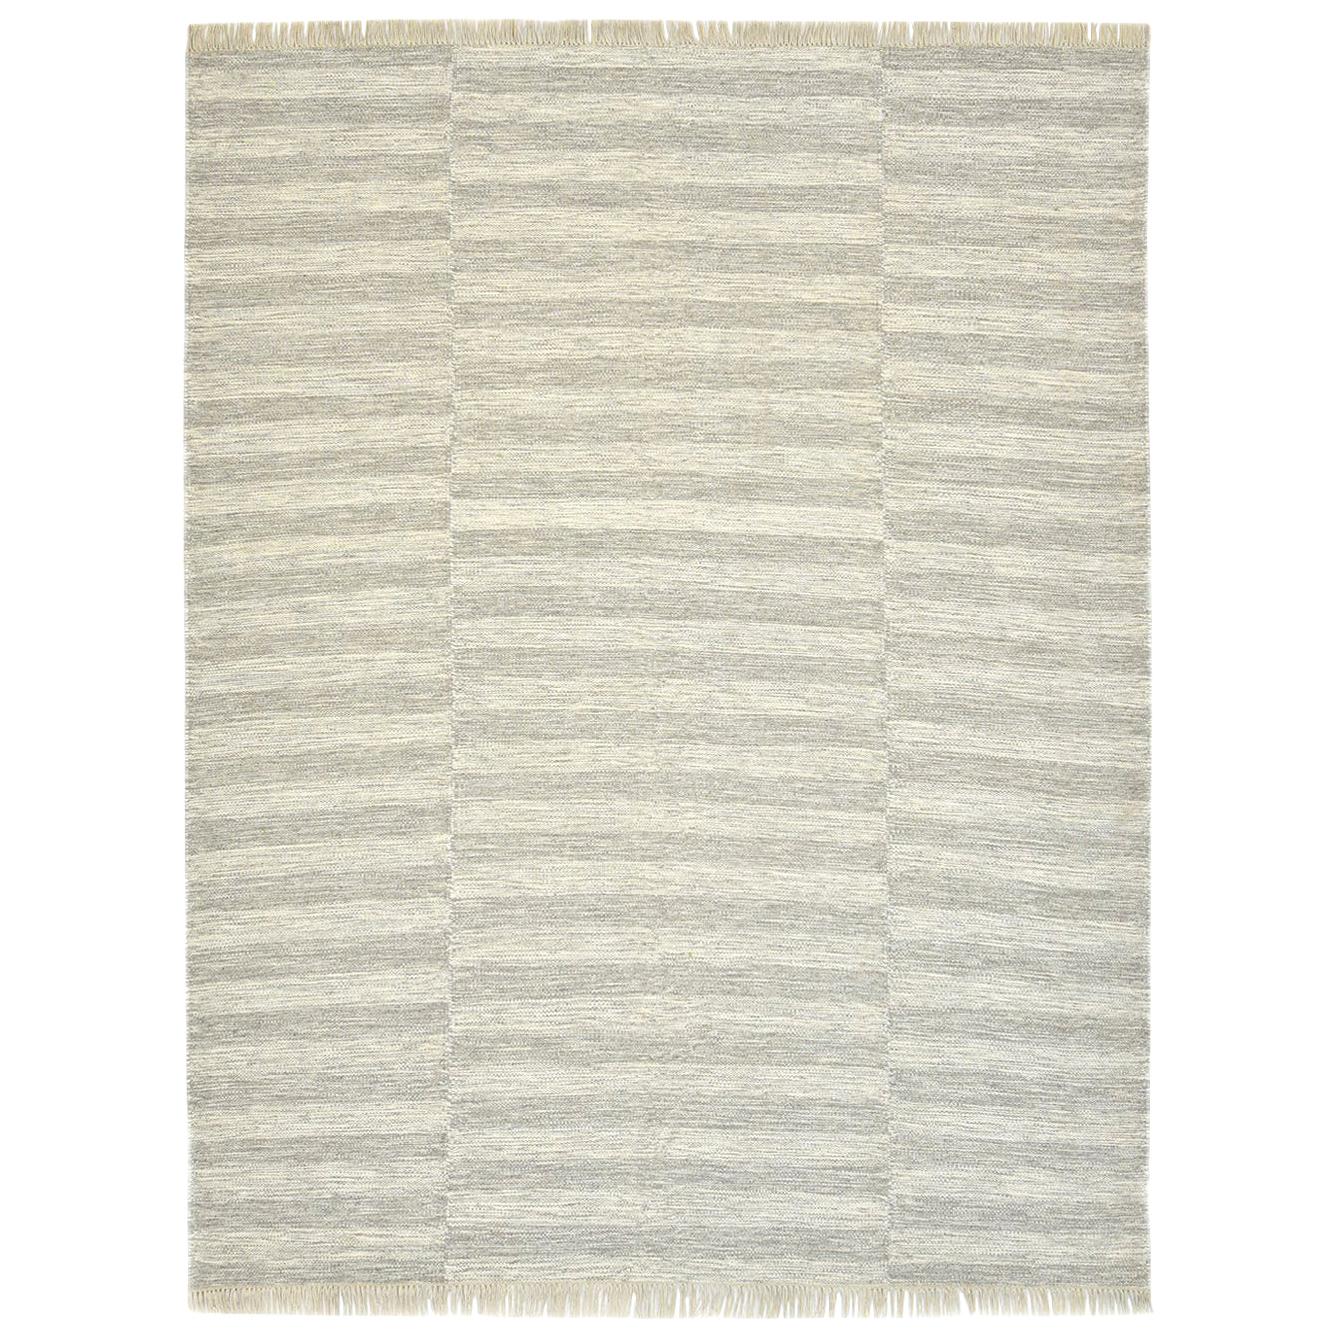 Indian Made Hand Woven Contemporary Flatweave Area Rug im Angebot